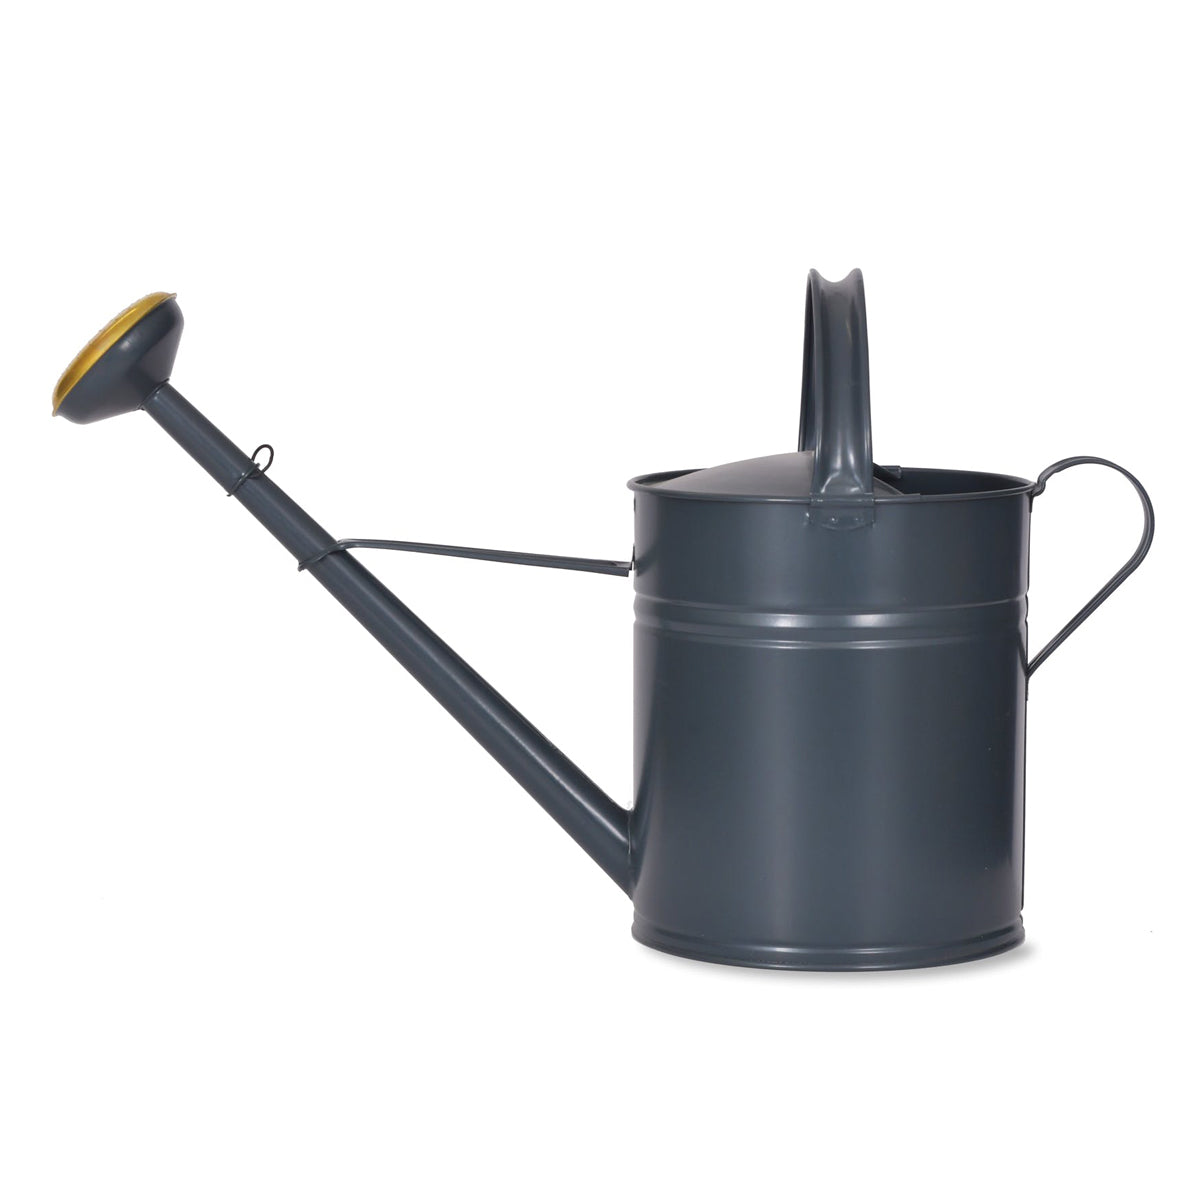 Garden trading black carbon metal Watering Can plant from house doctor